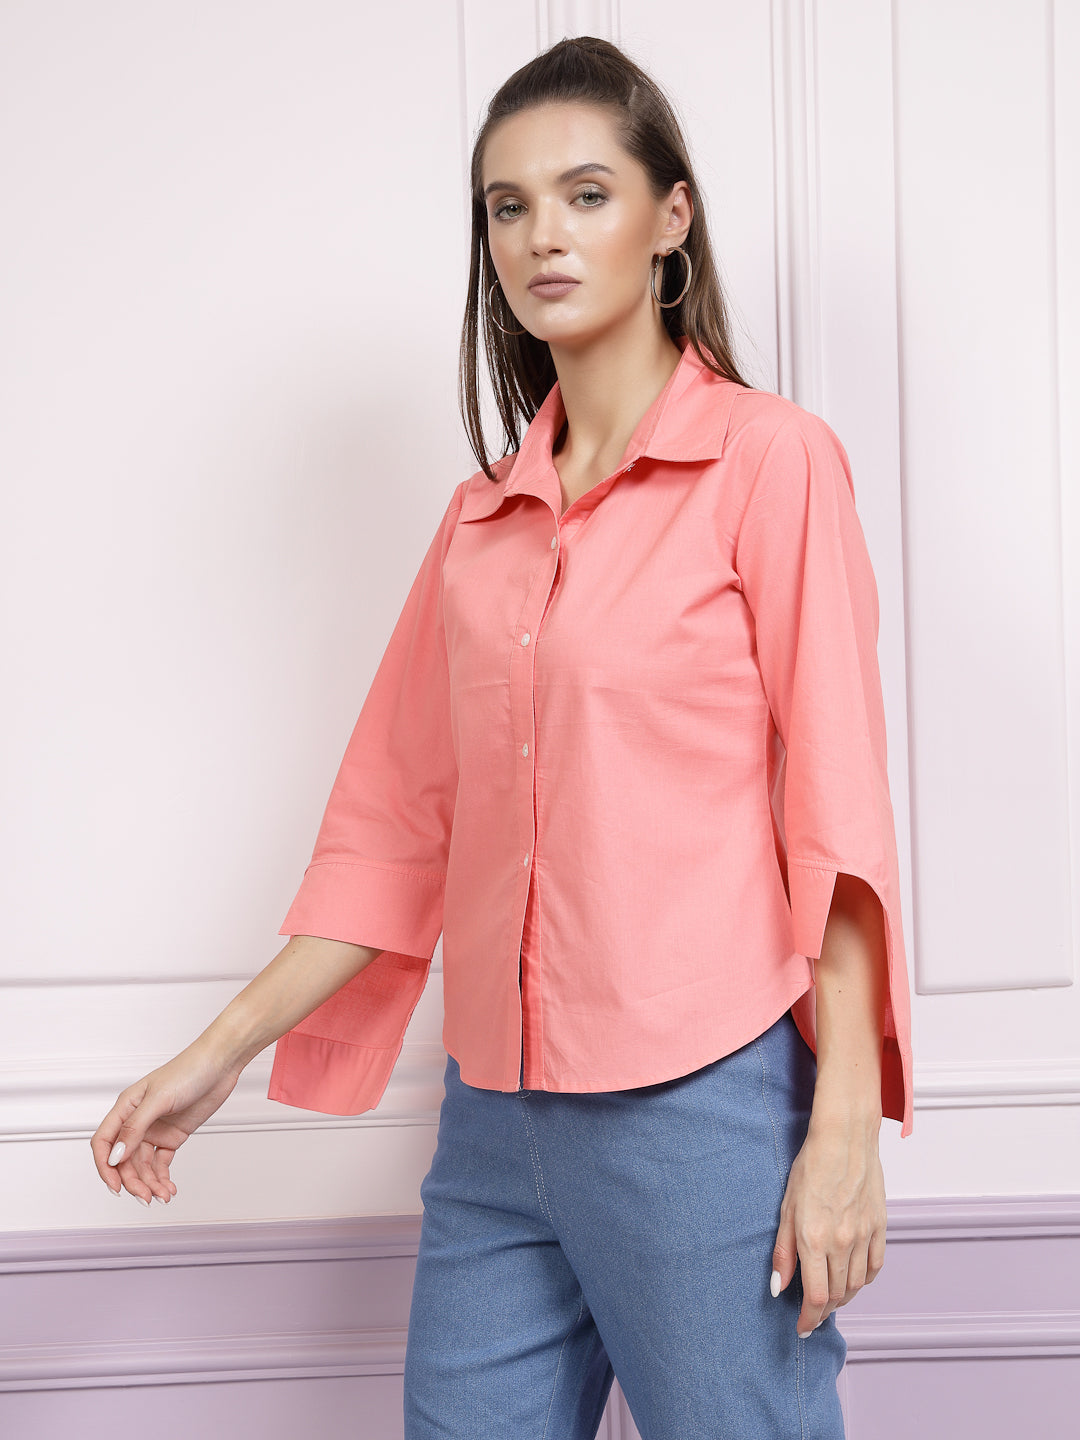 Athena High Low Cuffed Sleeves Cotton Shirt Style Top